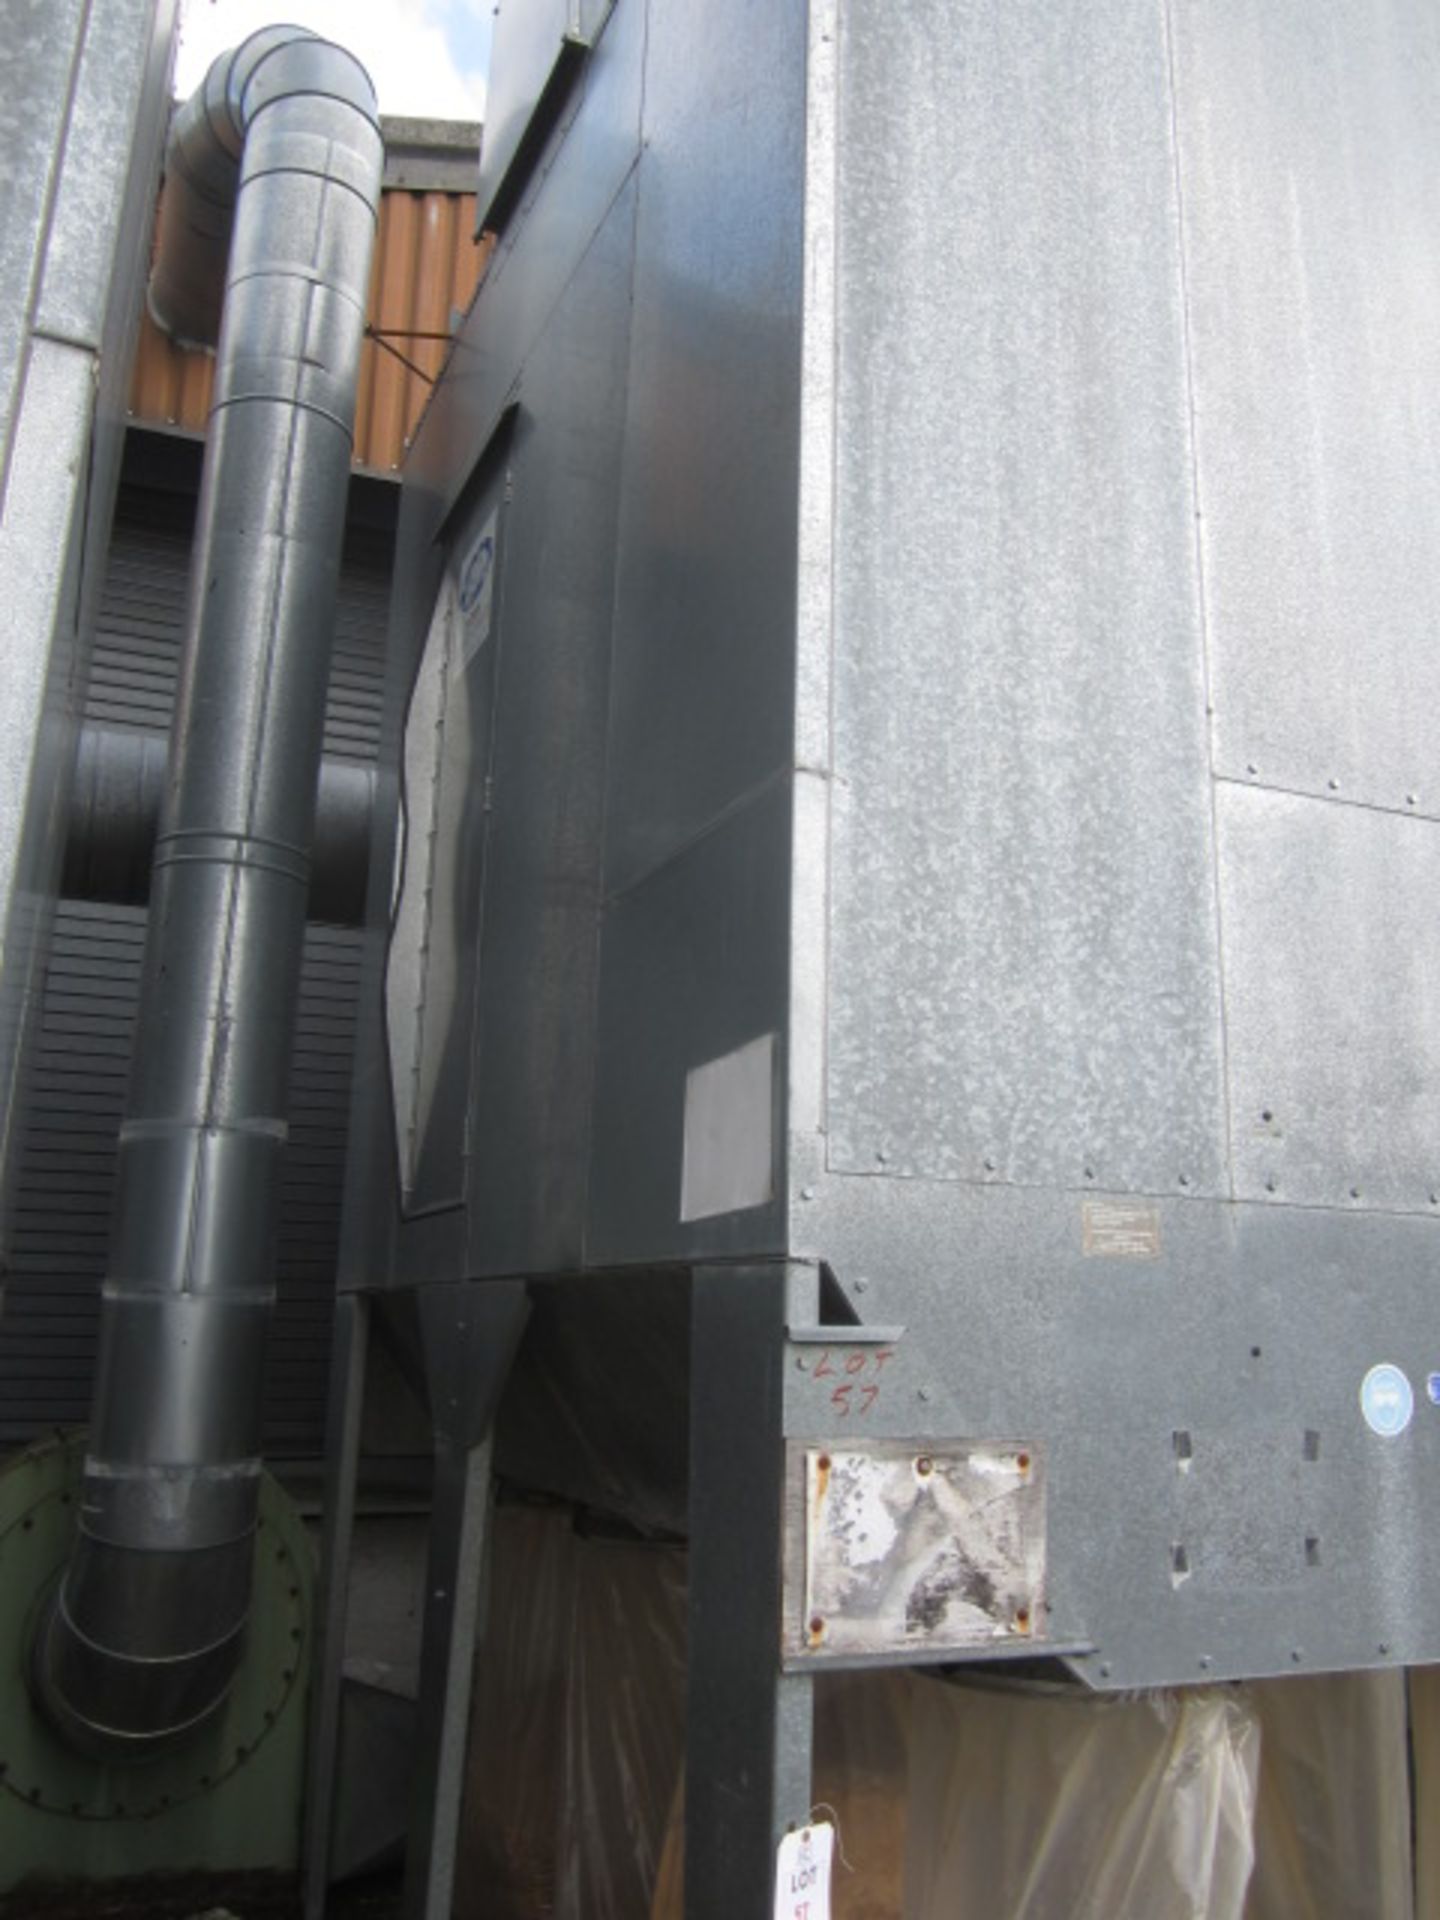 Airplants galvanised steel, heavy duty dust extraction unit, with 8 bag outlet , APL 50MD extraction - Image 3 of 8